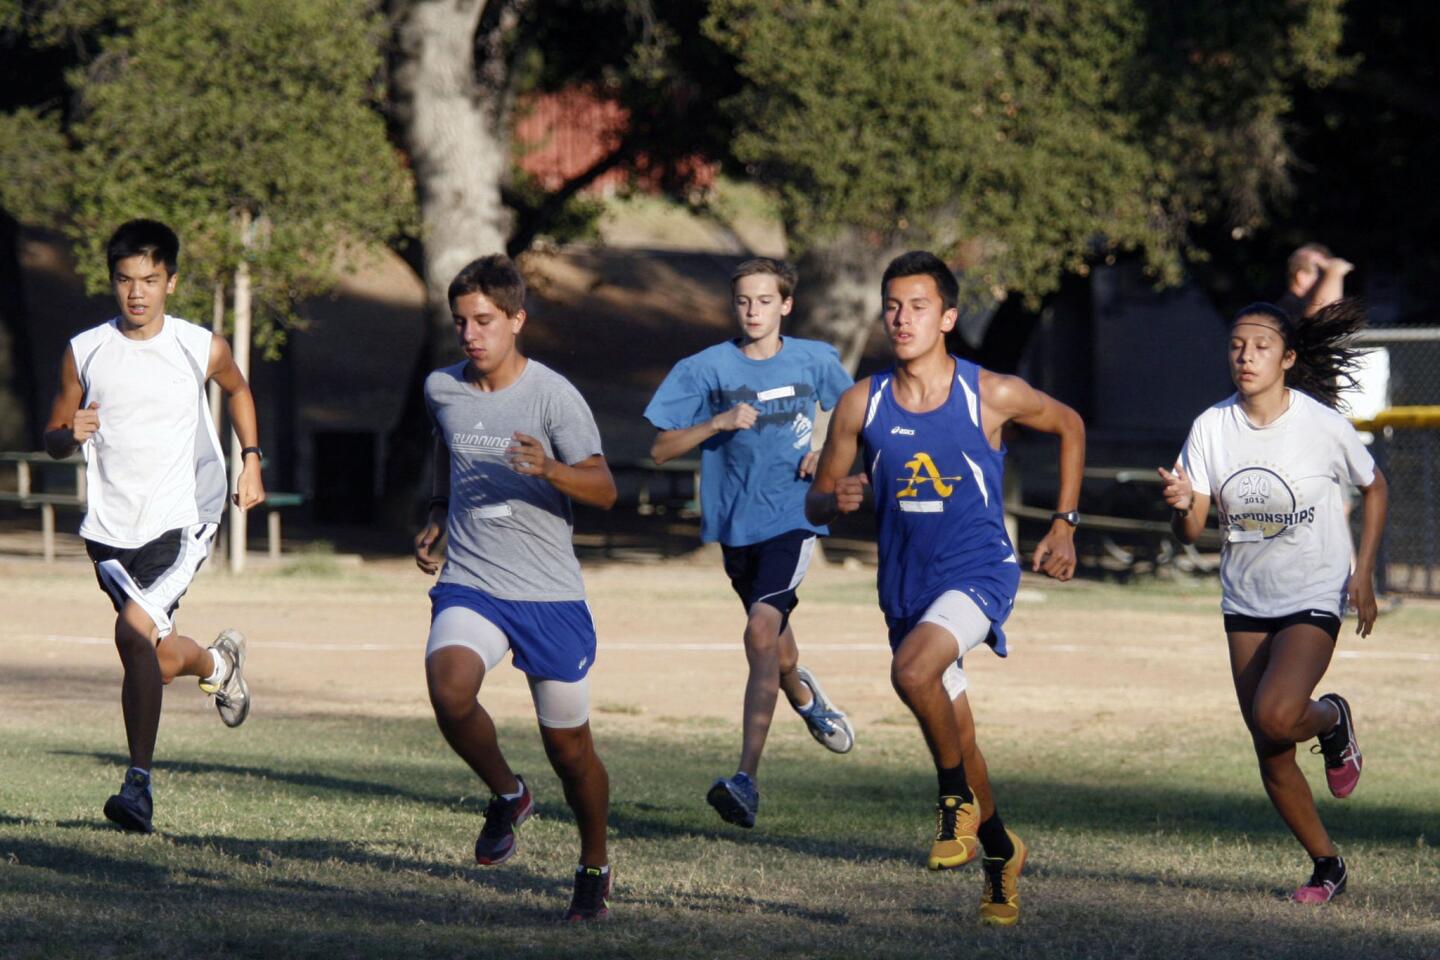 Runners sprint as they participate in a race series at Crescenta Valley Park on Wednesday, August 8, 2012.